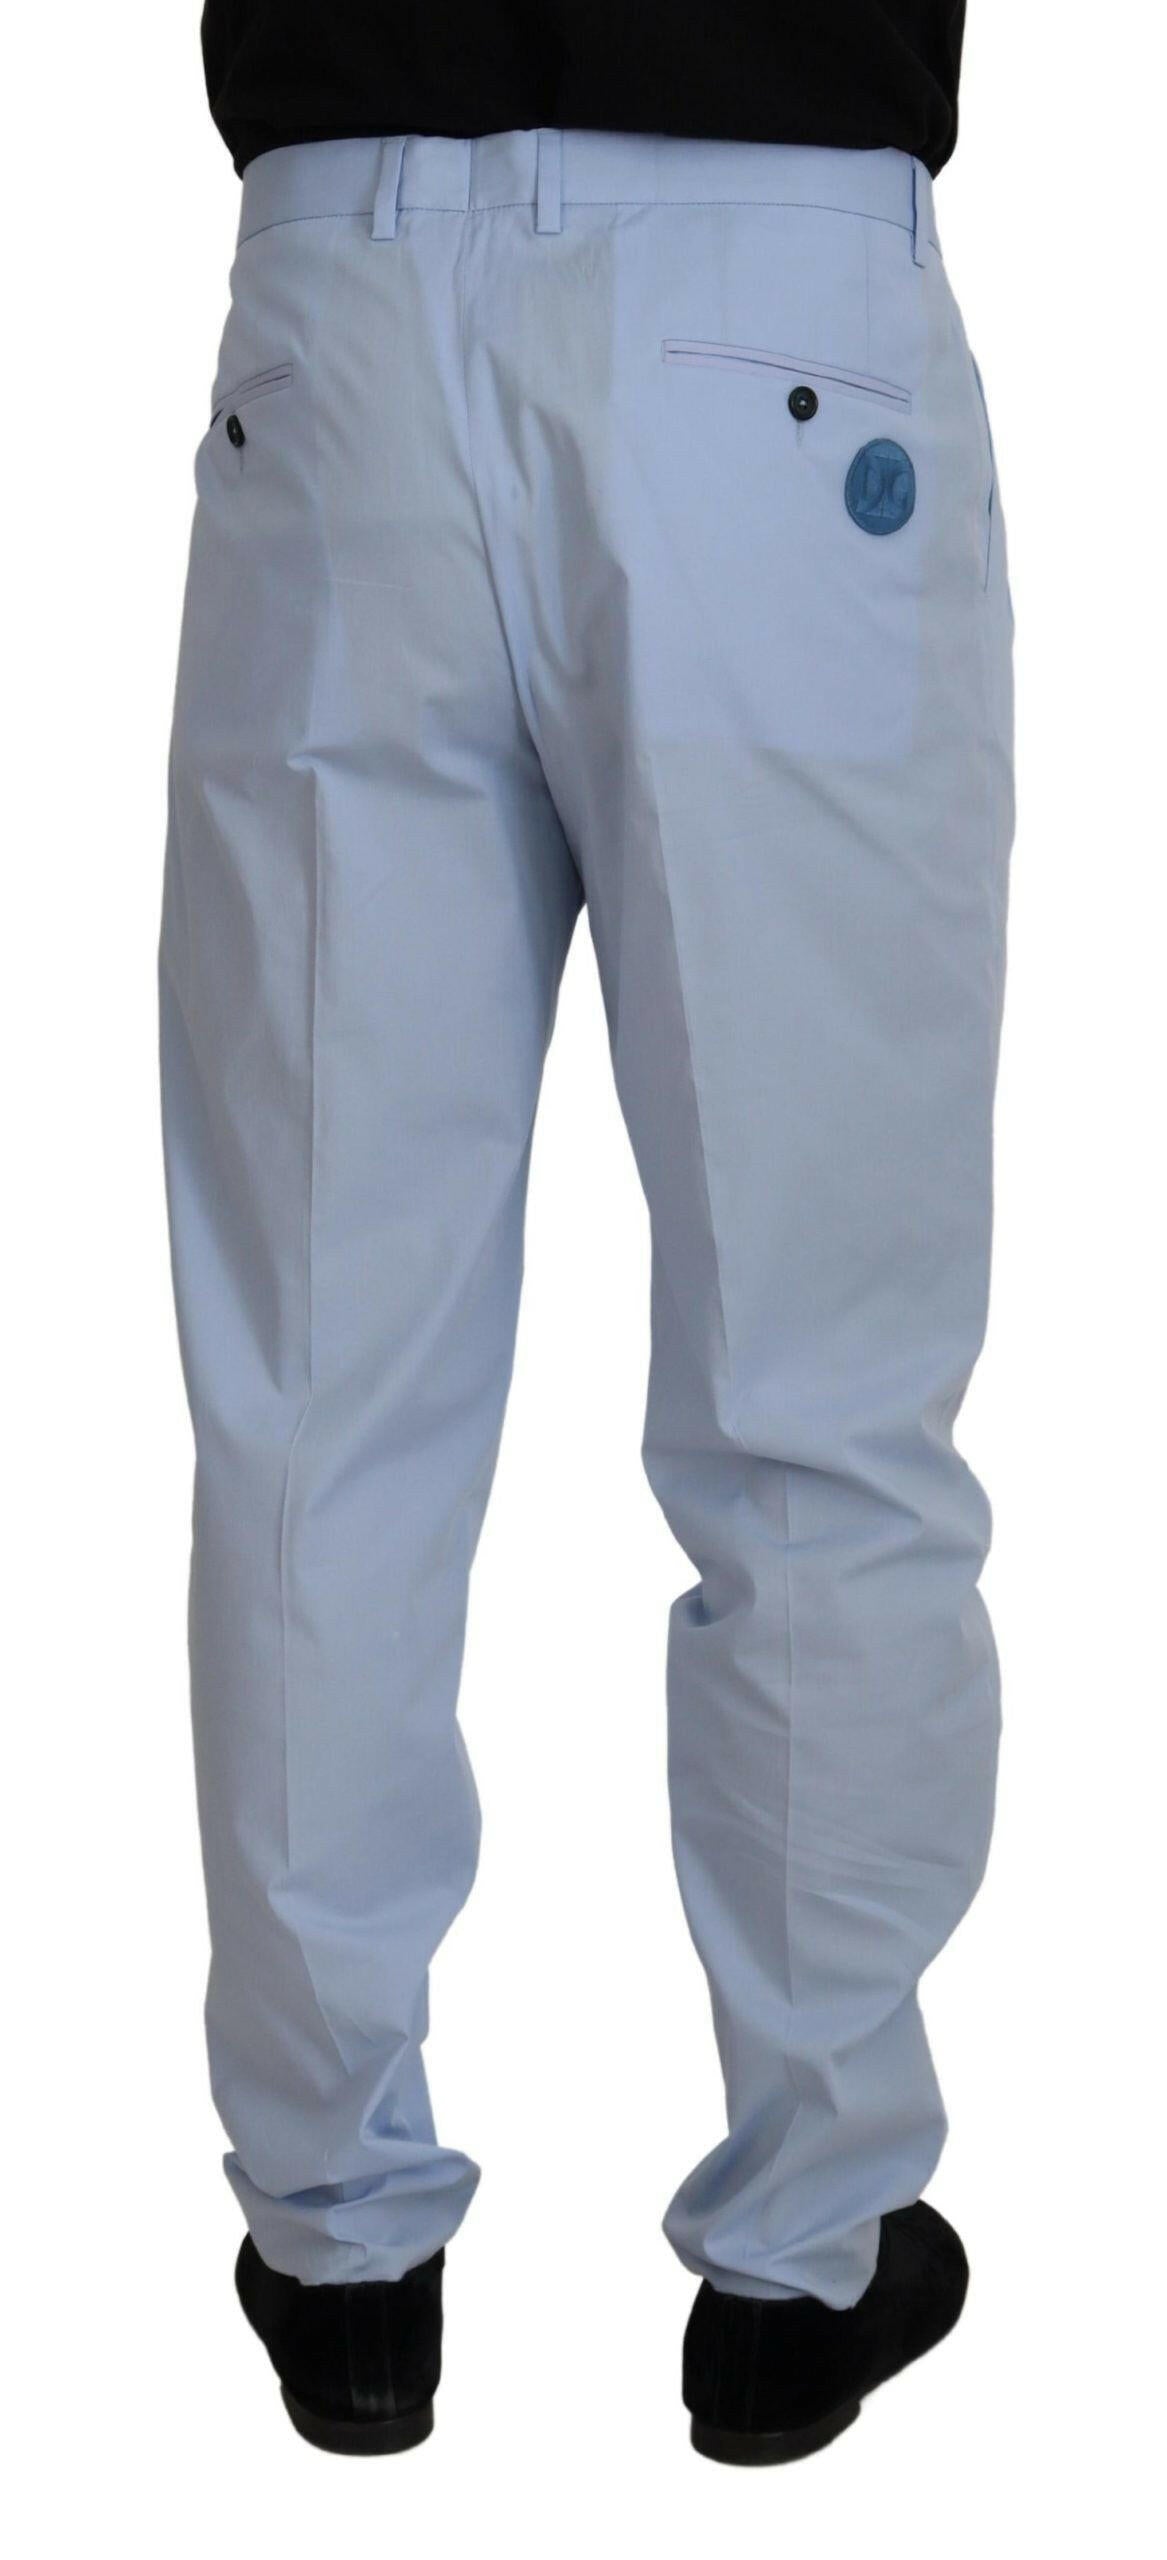 Dolce & Gabbana Blue Cotton Stretch Trousers Chinos Pants - GENUINE AUTHENTIC BRAND LLC  